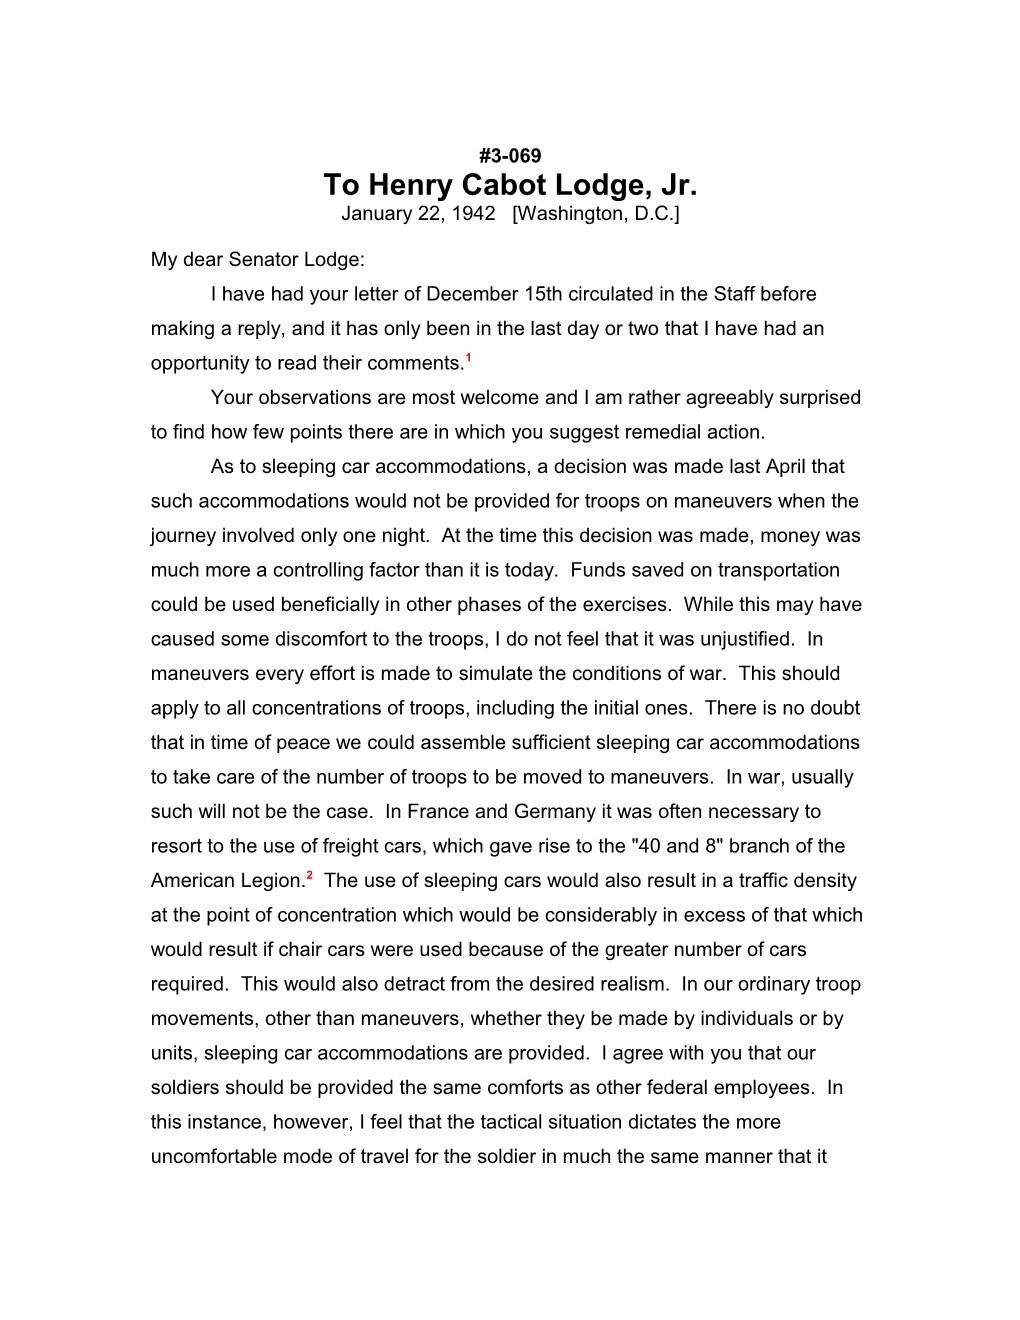 To Henry Cabot Lodge, Jr